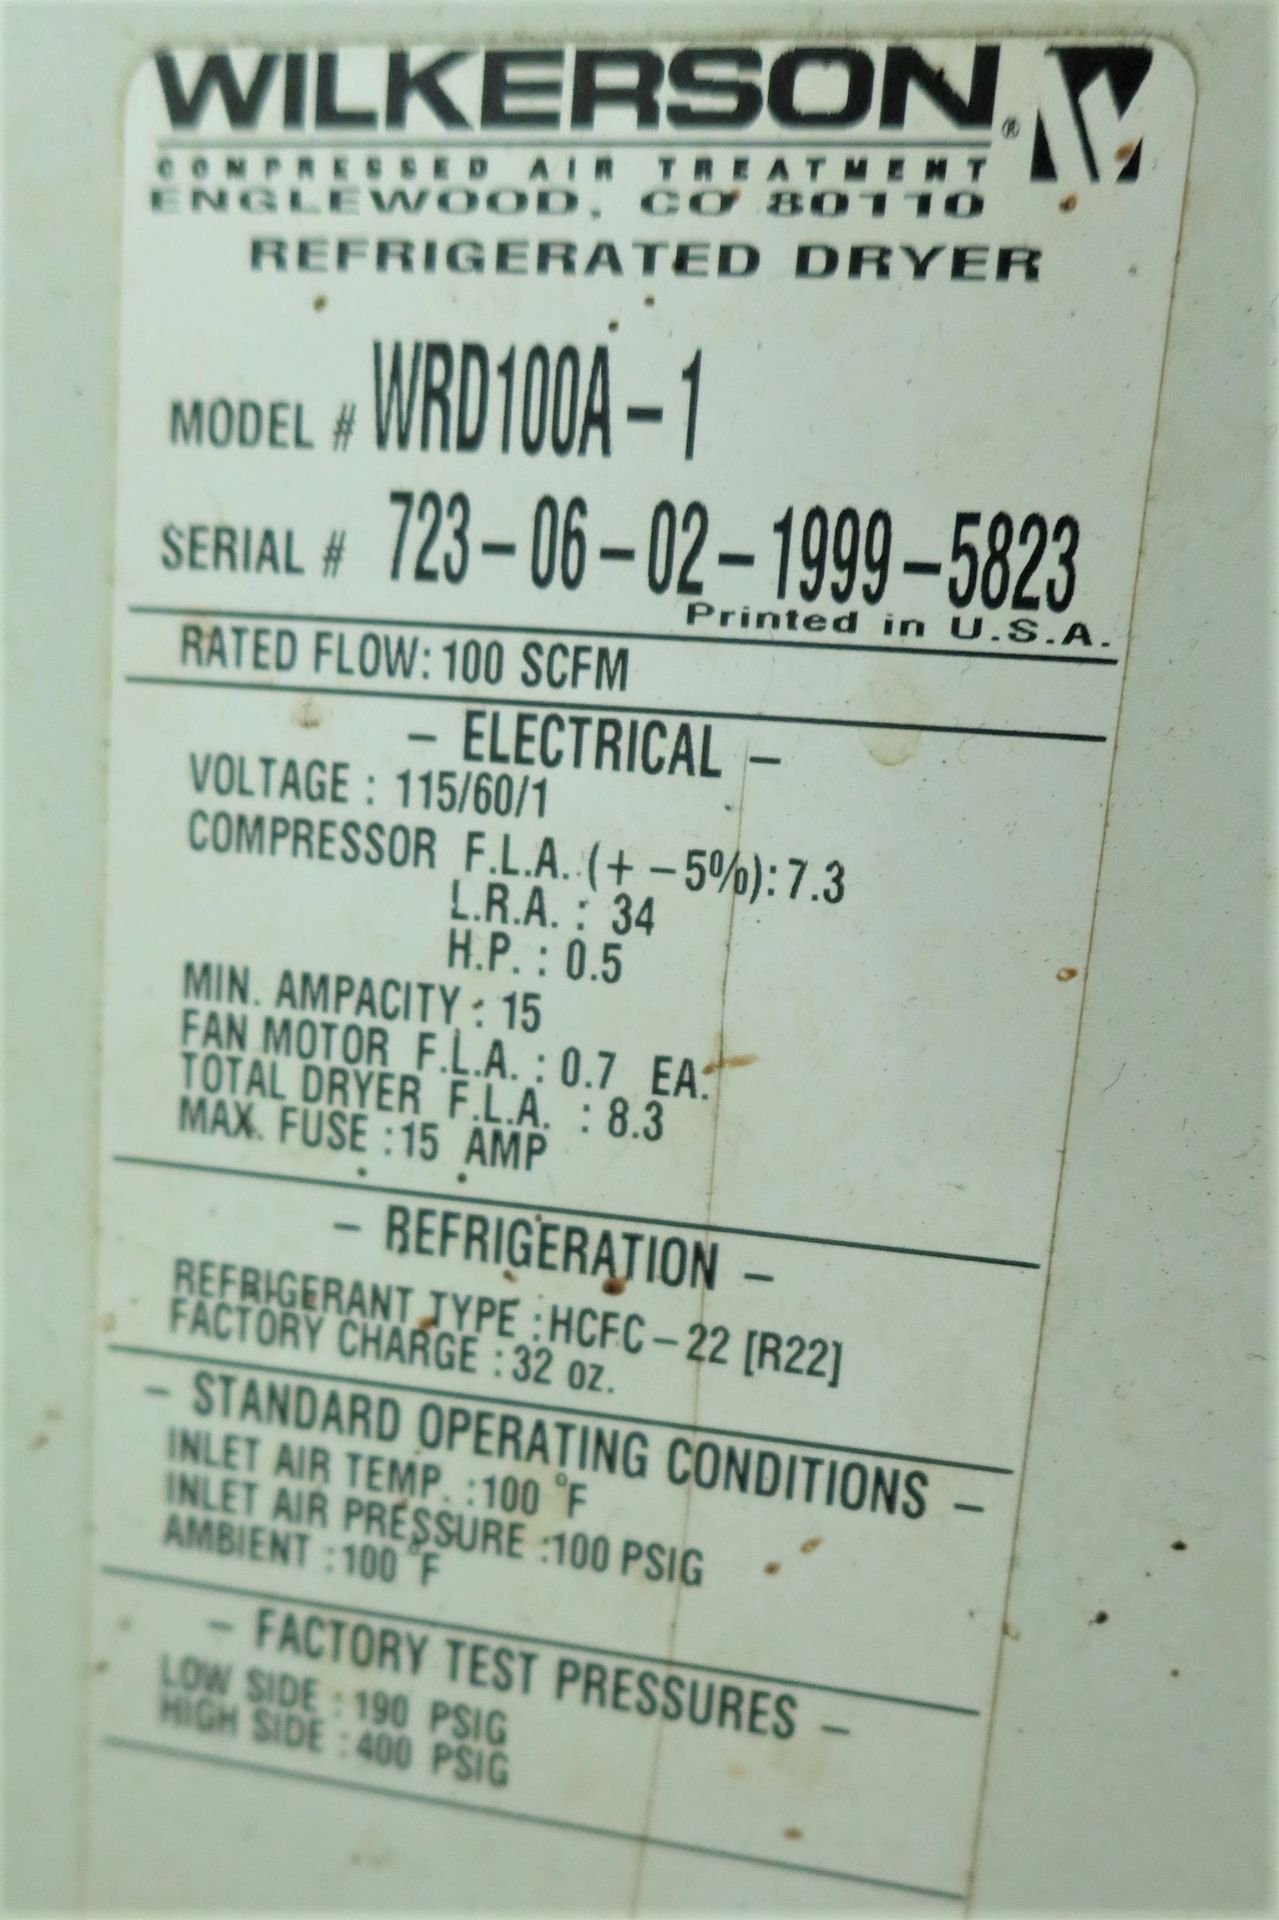 Wilkerson WRD100A-1 Refrigerated Air Dryer, S/N 723-06-02-1999-5823 - Image 3 of 4